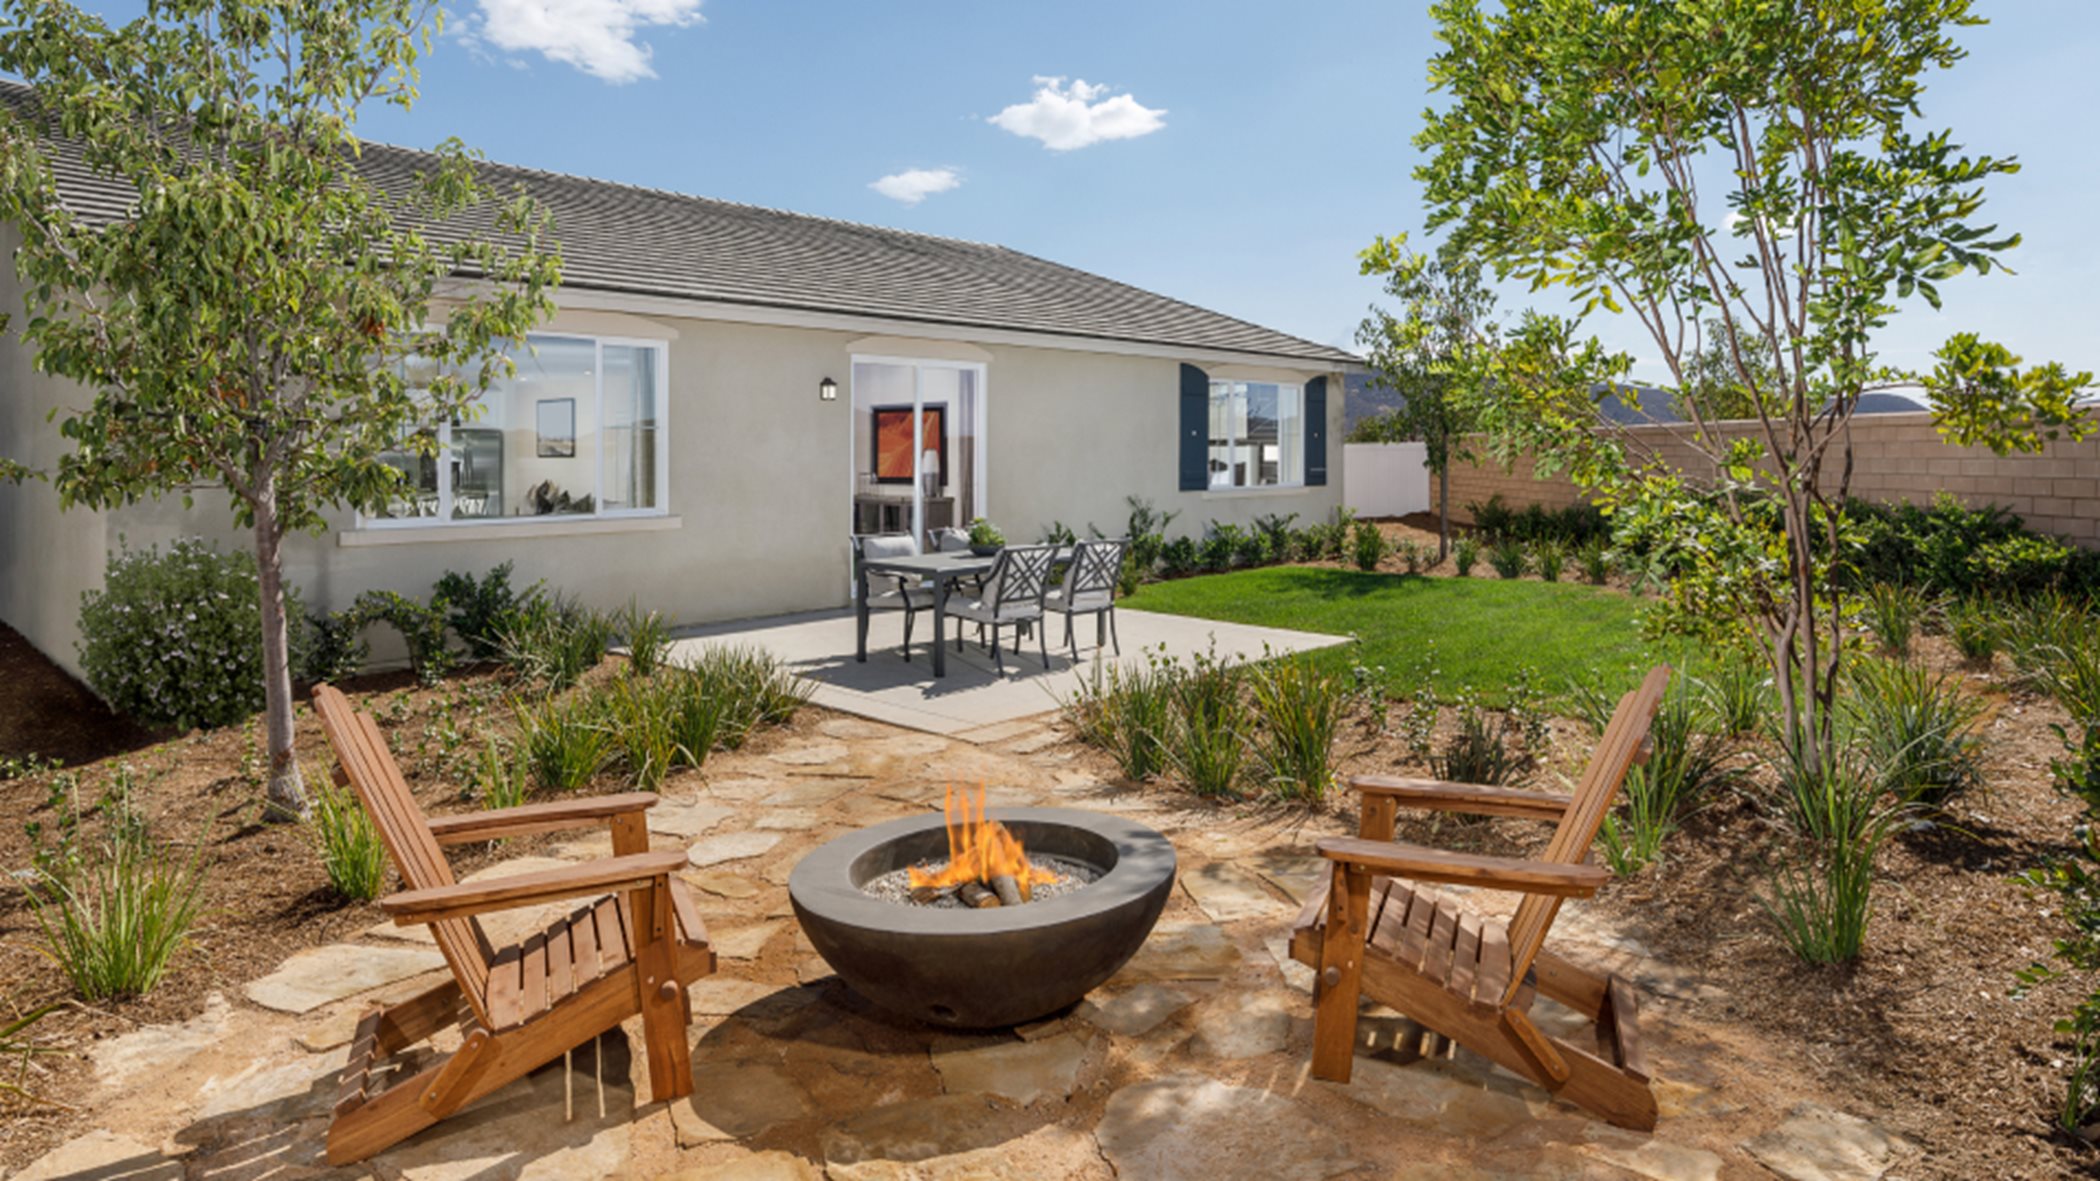 Furnished outdoor space with fire pit